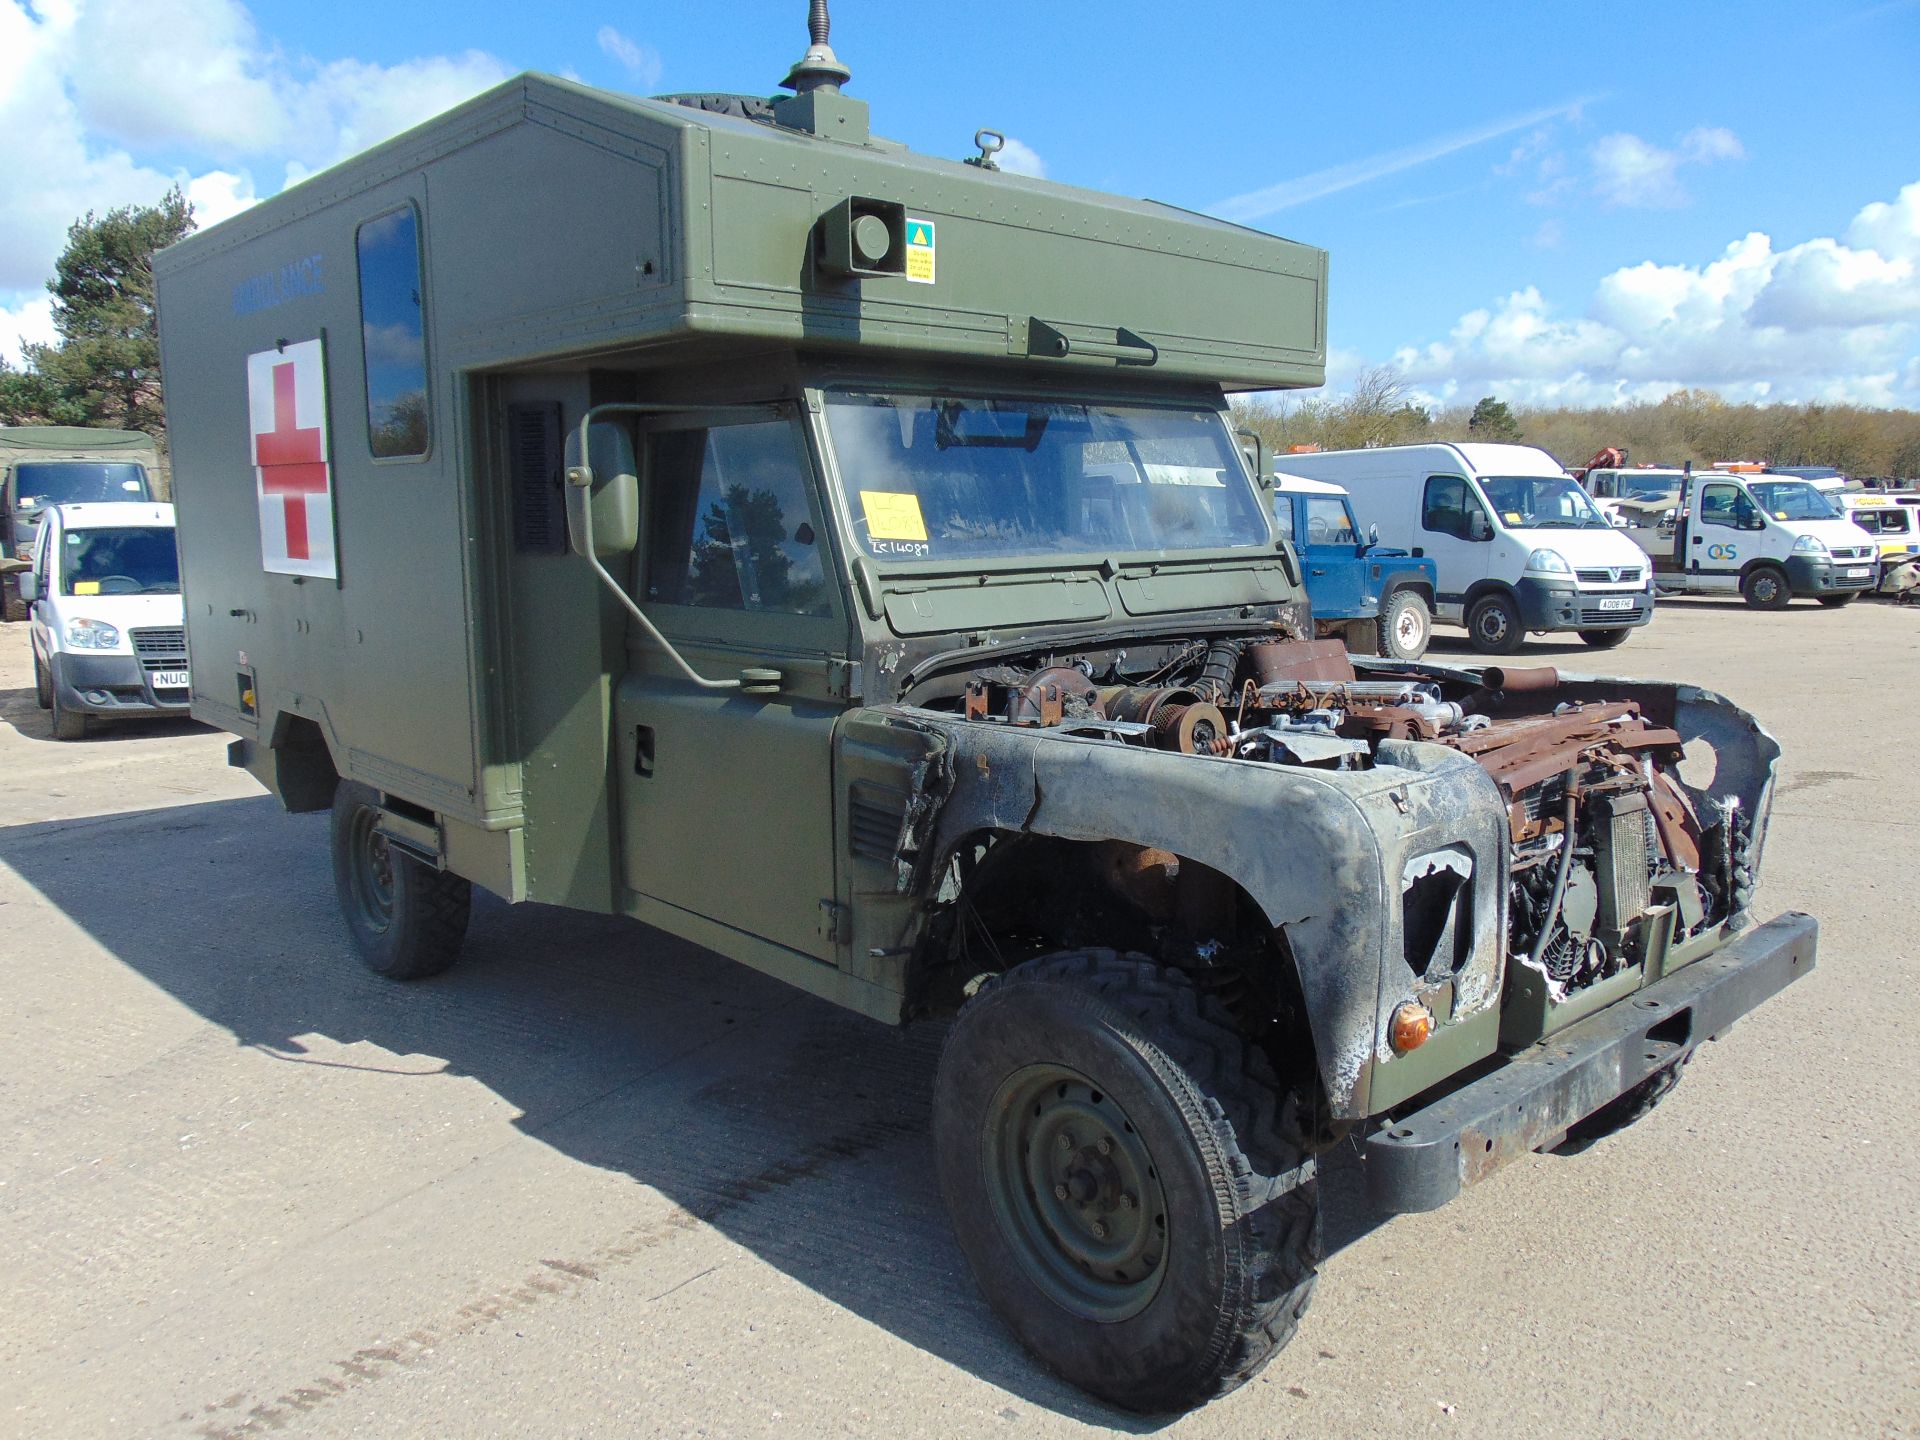 Military Specification Land Rover Wolf 130 ambulance.